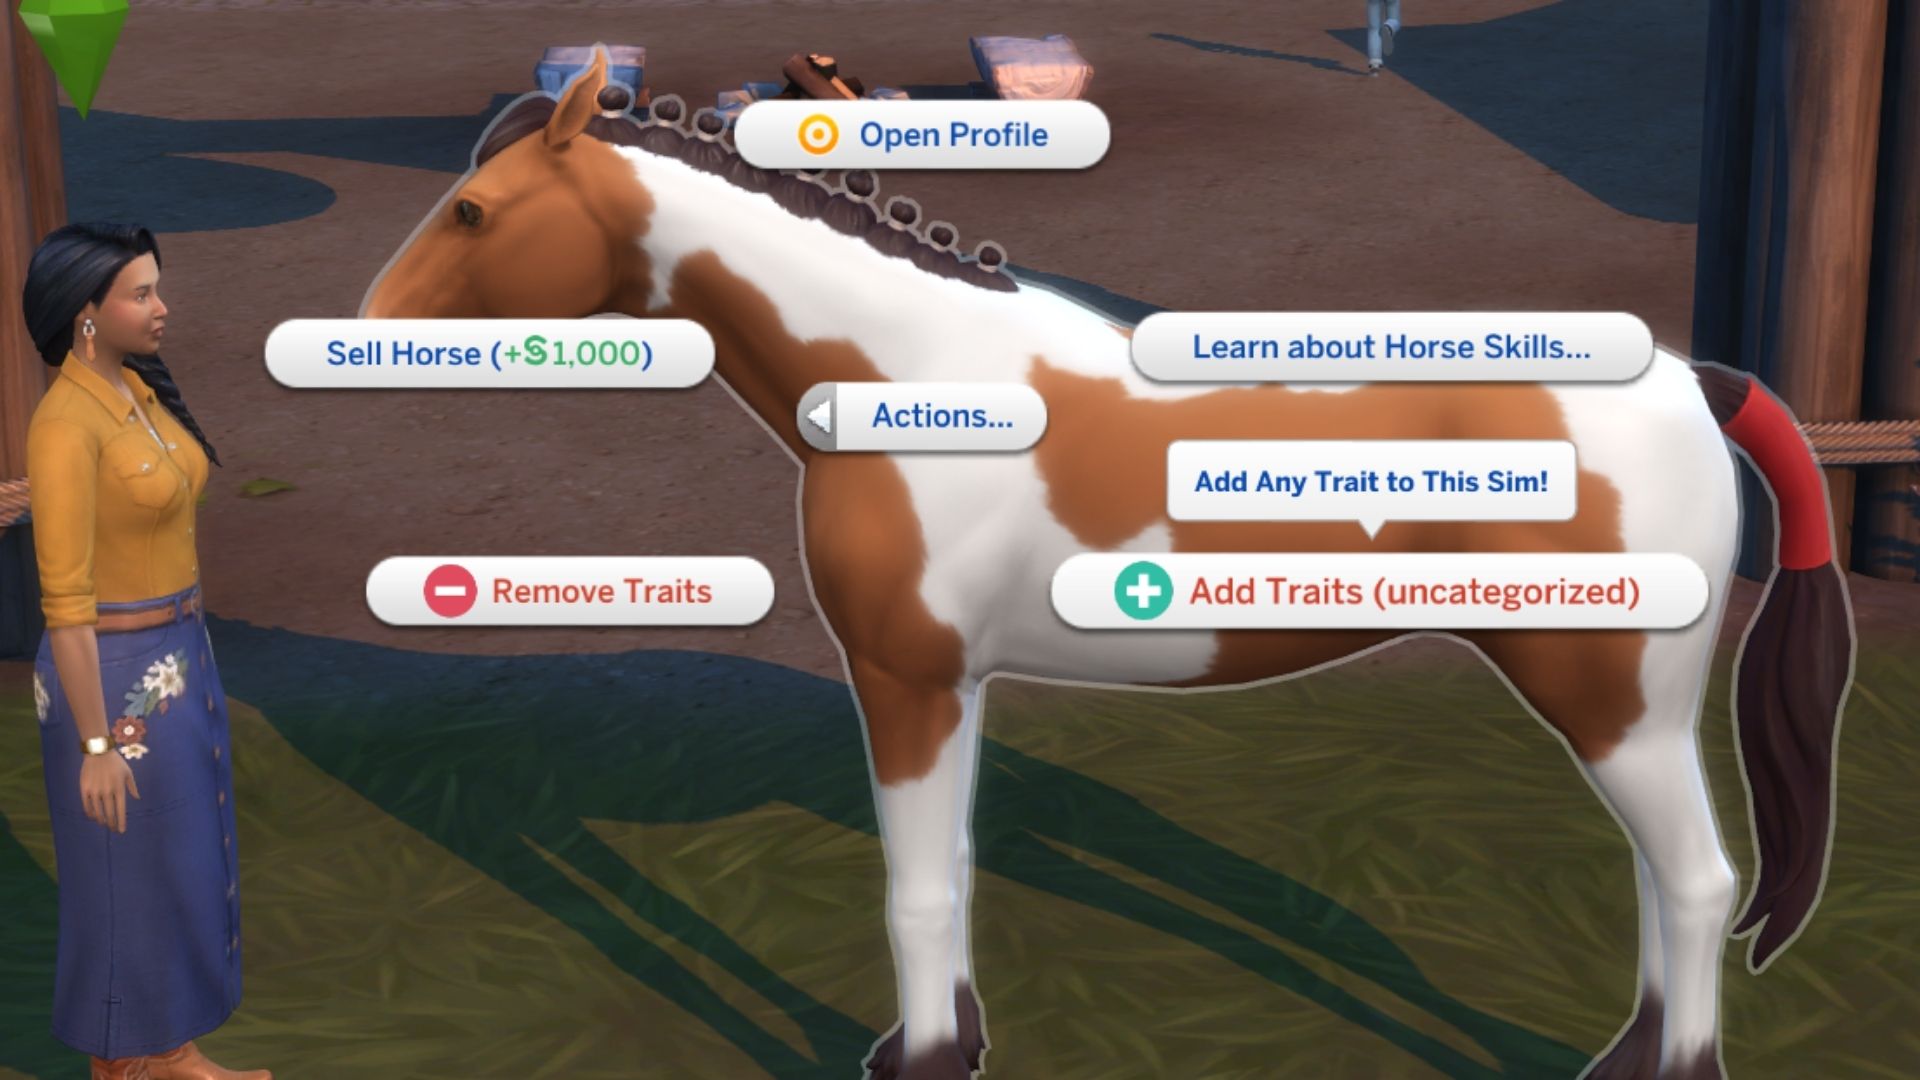 The Sims 4 Mods Hub: Everything You Need to Know!